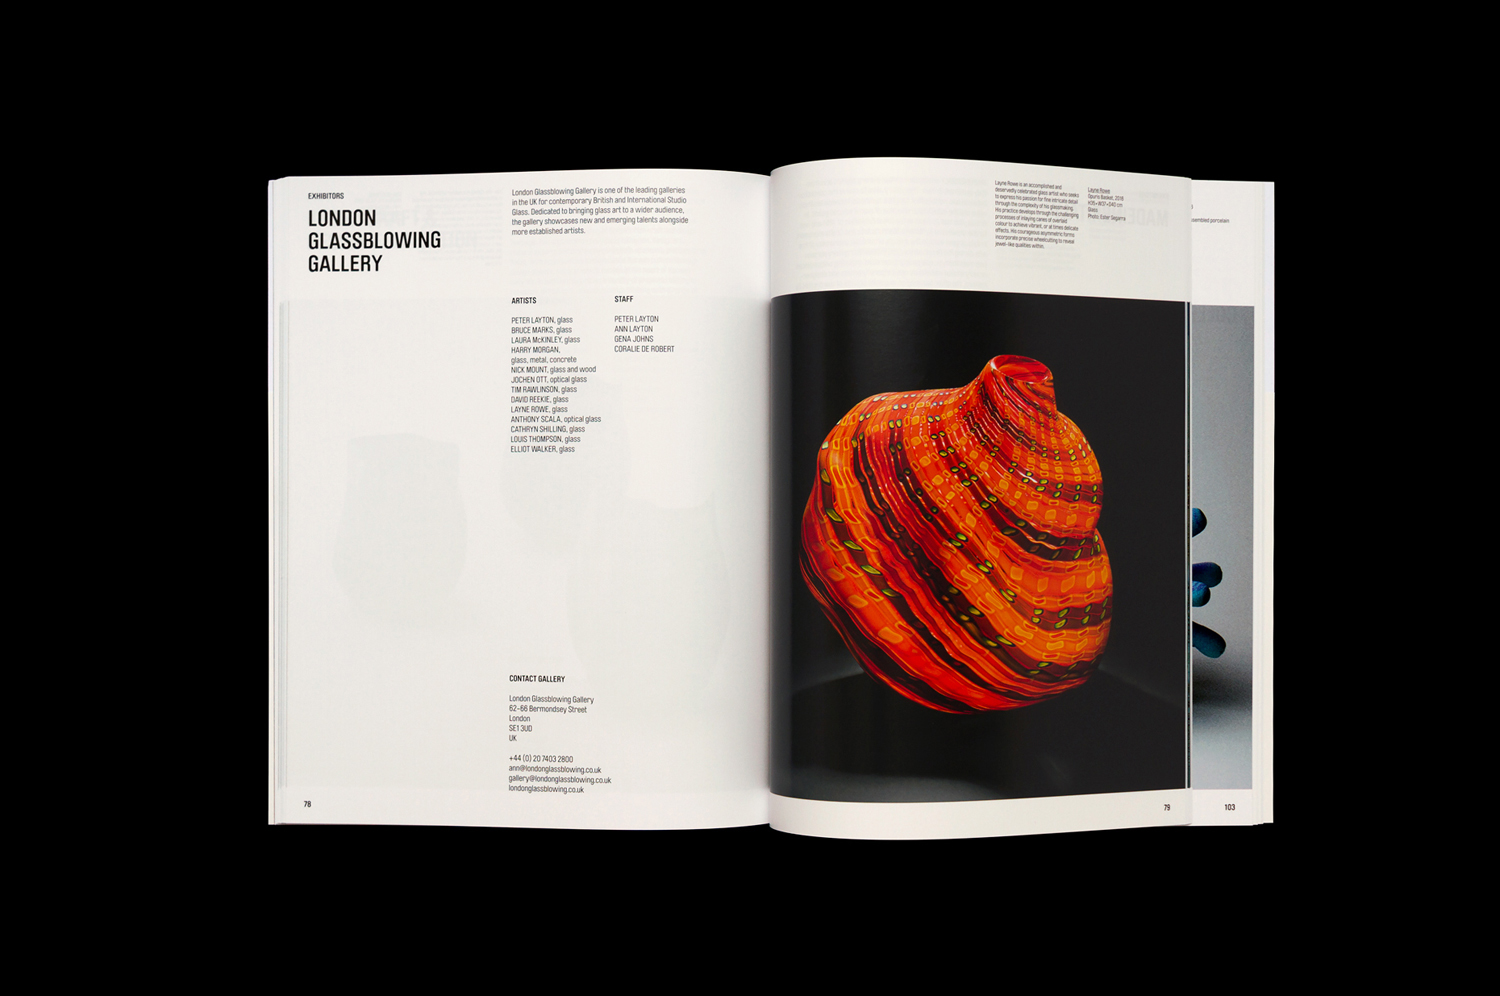 Brand identity and catalogue for contemporary international art fair Collect, designed by Spin, London, UK